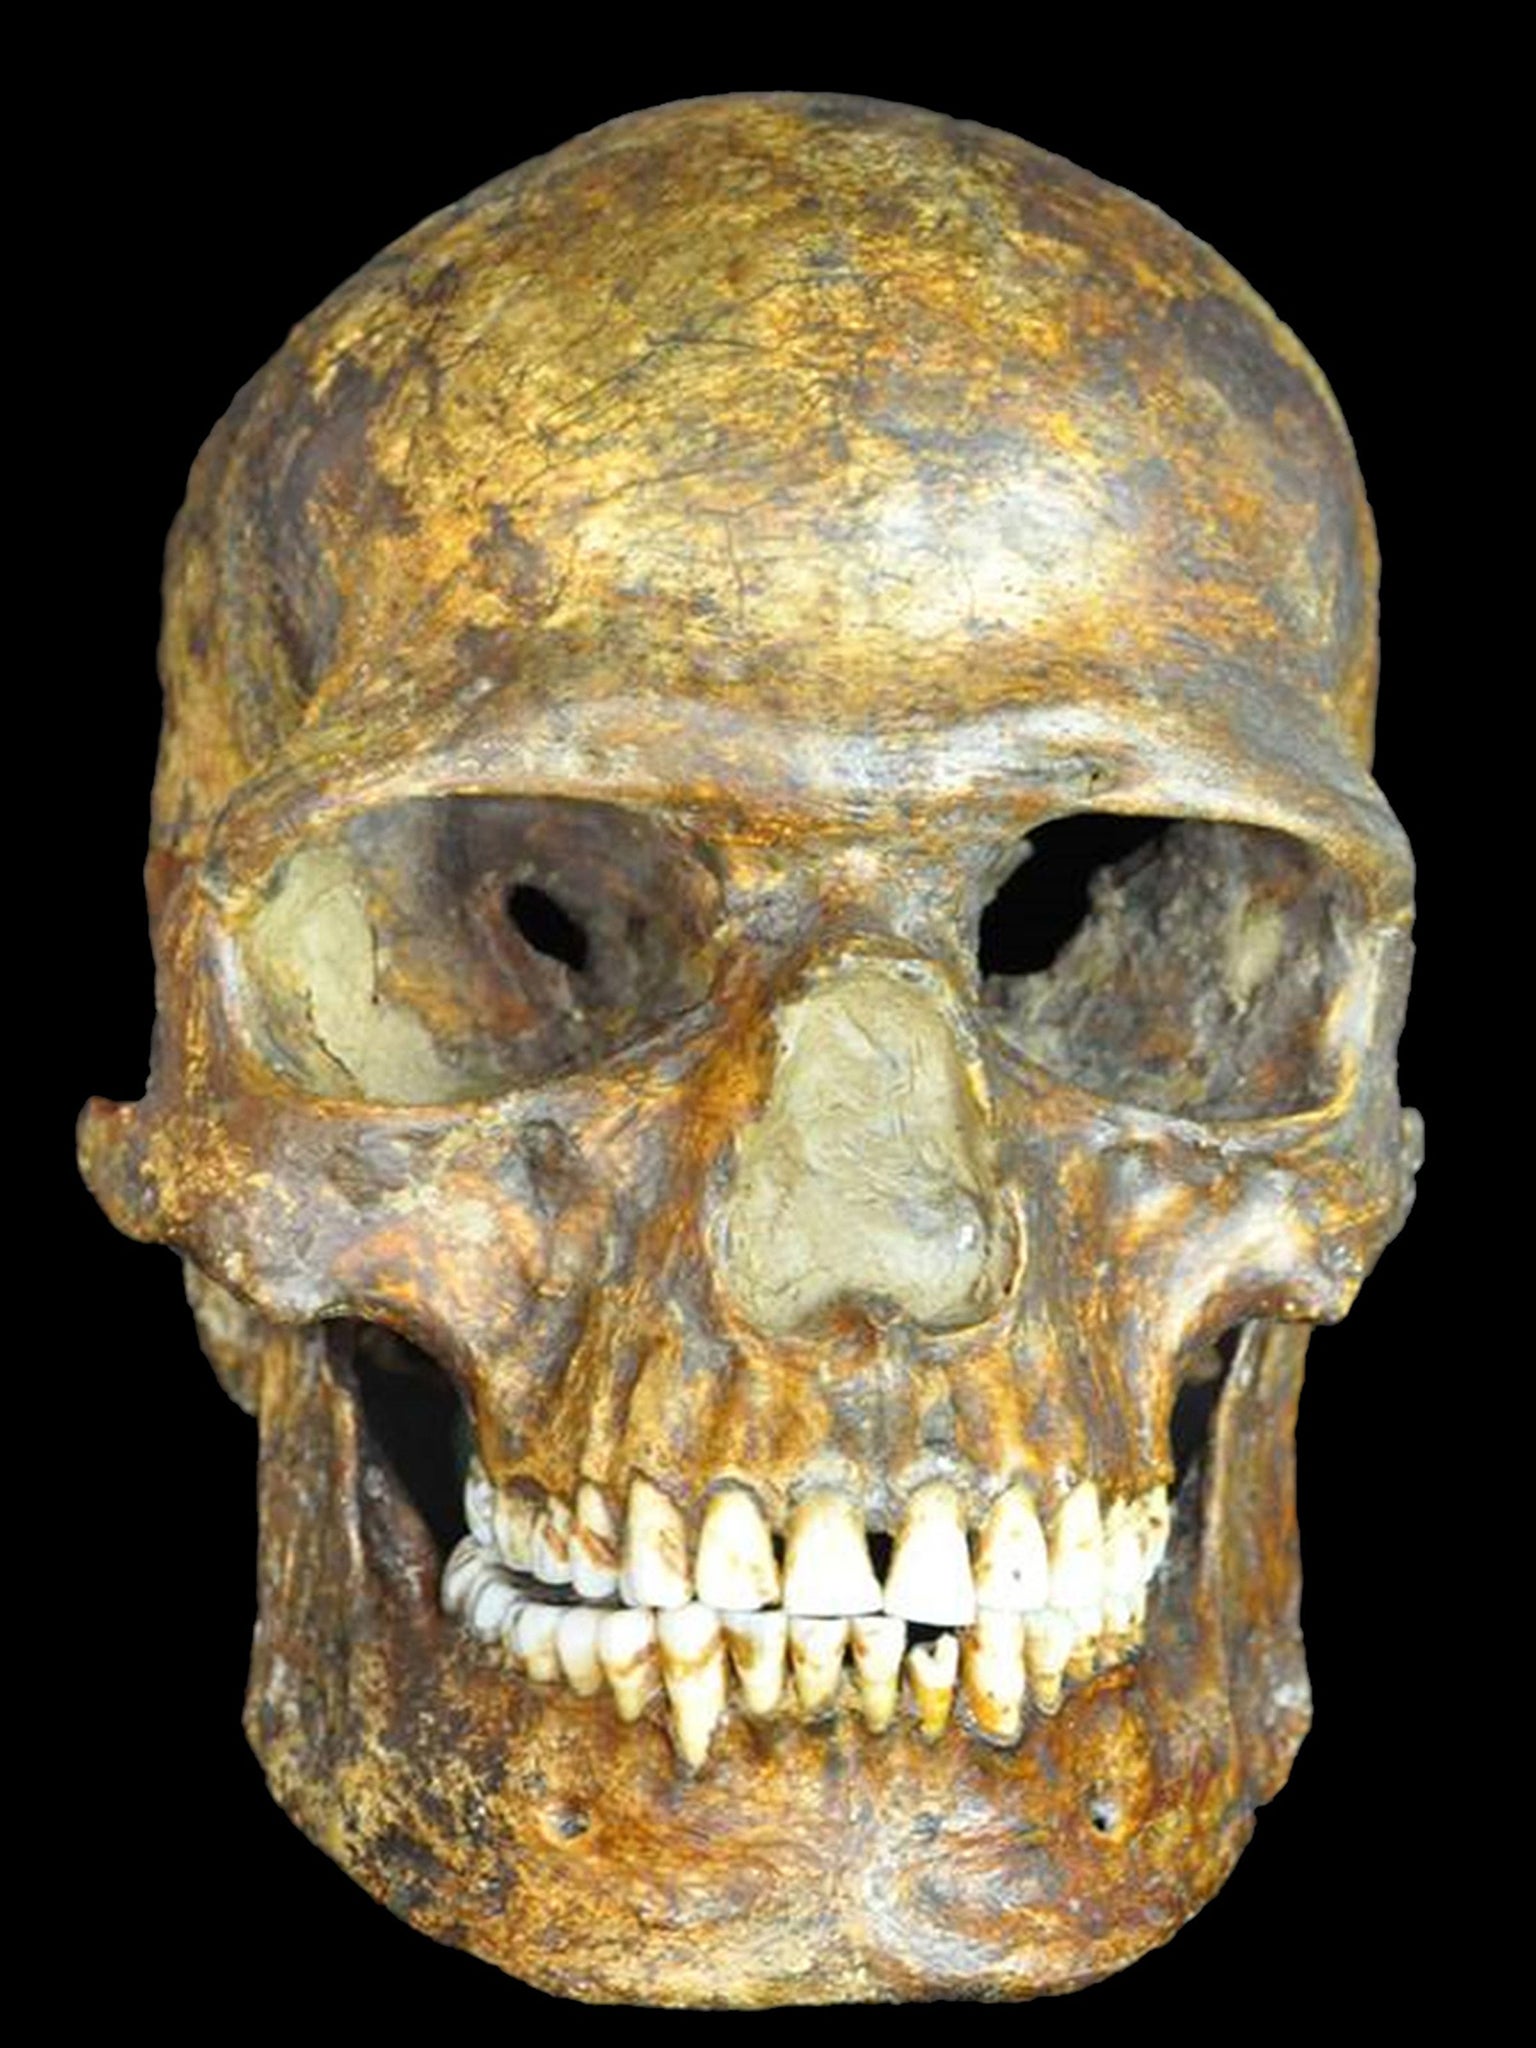 The DNA from a 36,000-year-old skull has similarities to modern-day Europeans